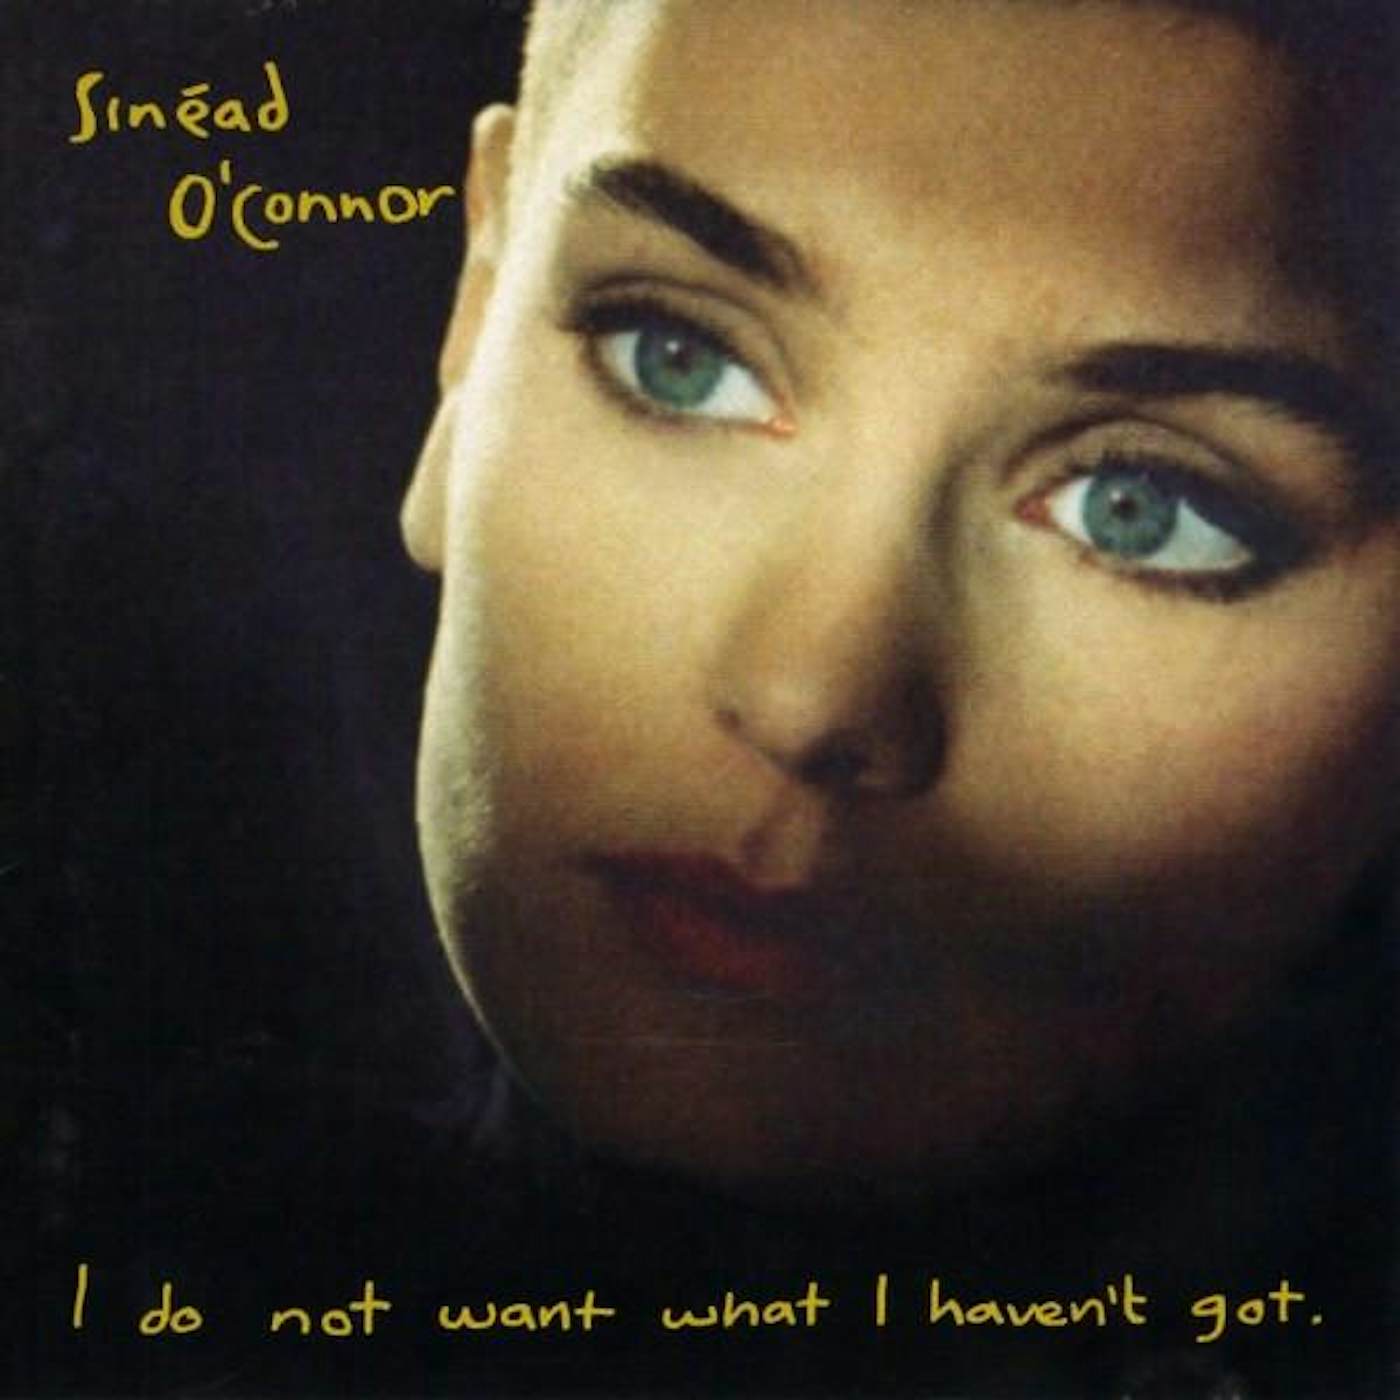 Sinéad O'Connor I DO NOT WANT WHAT I HAVEN'T GOT CD